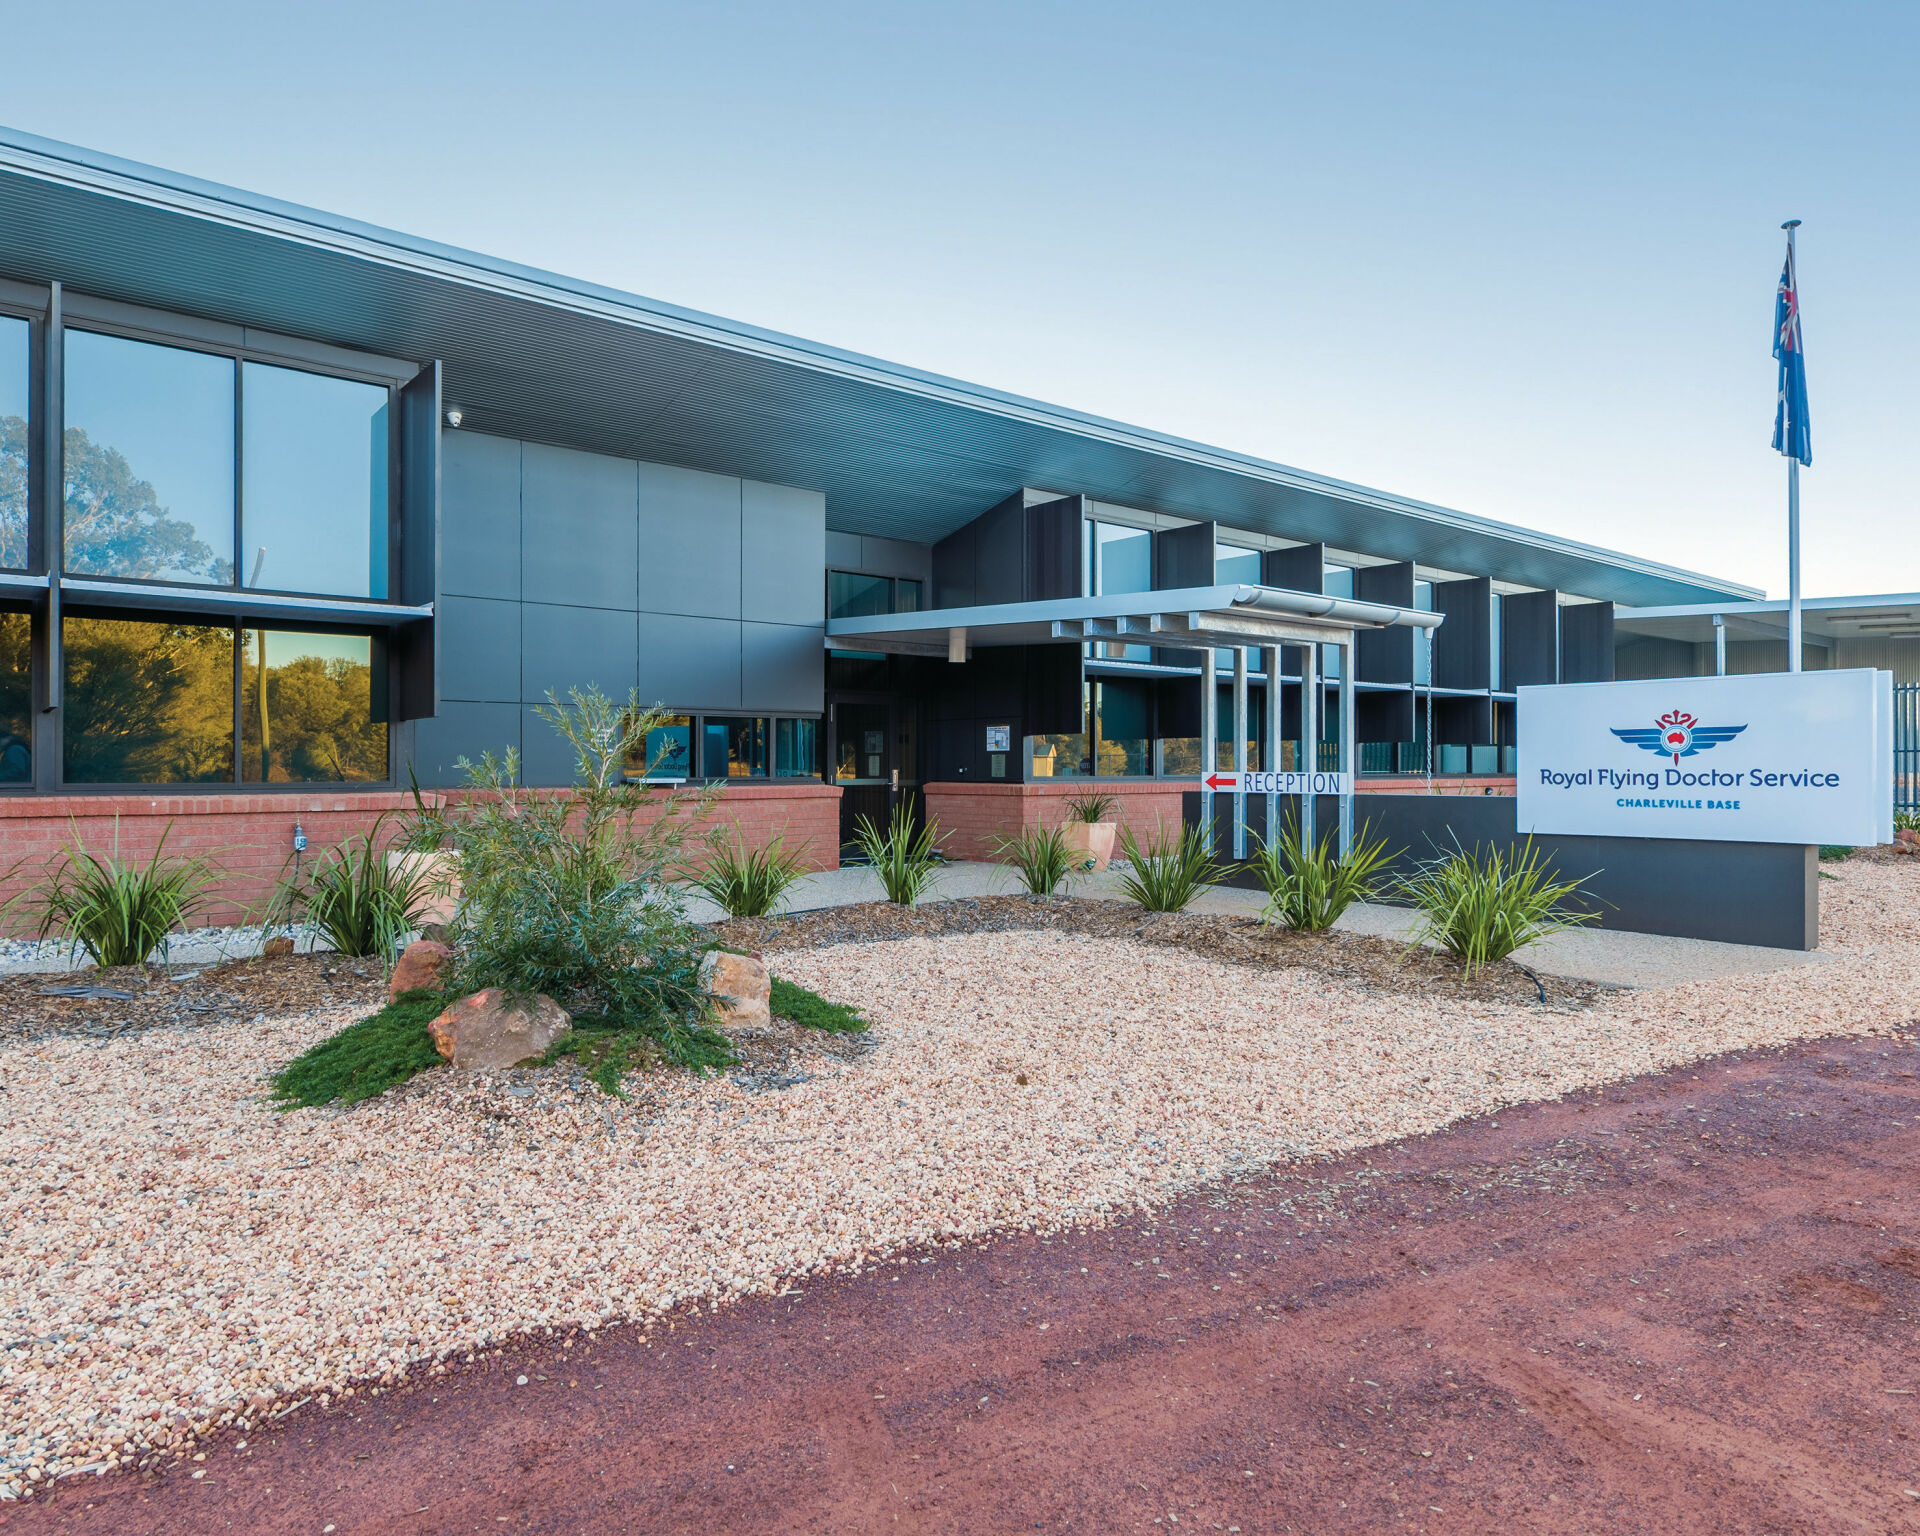 RFDS Visitor Centre